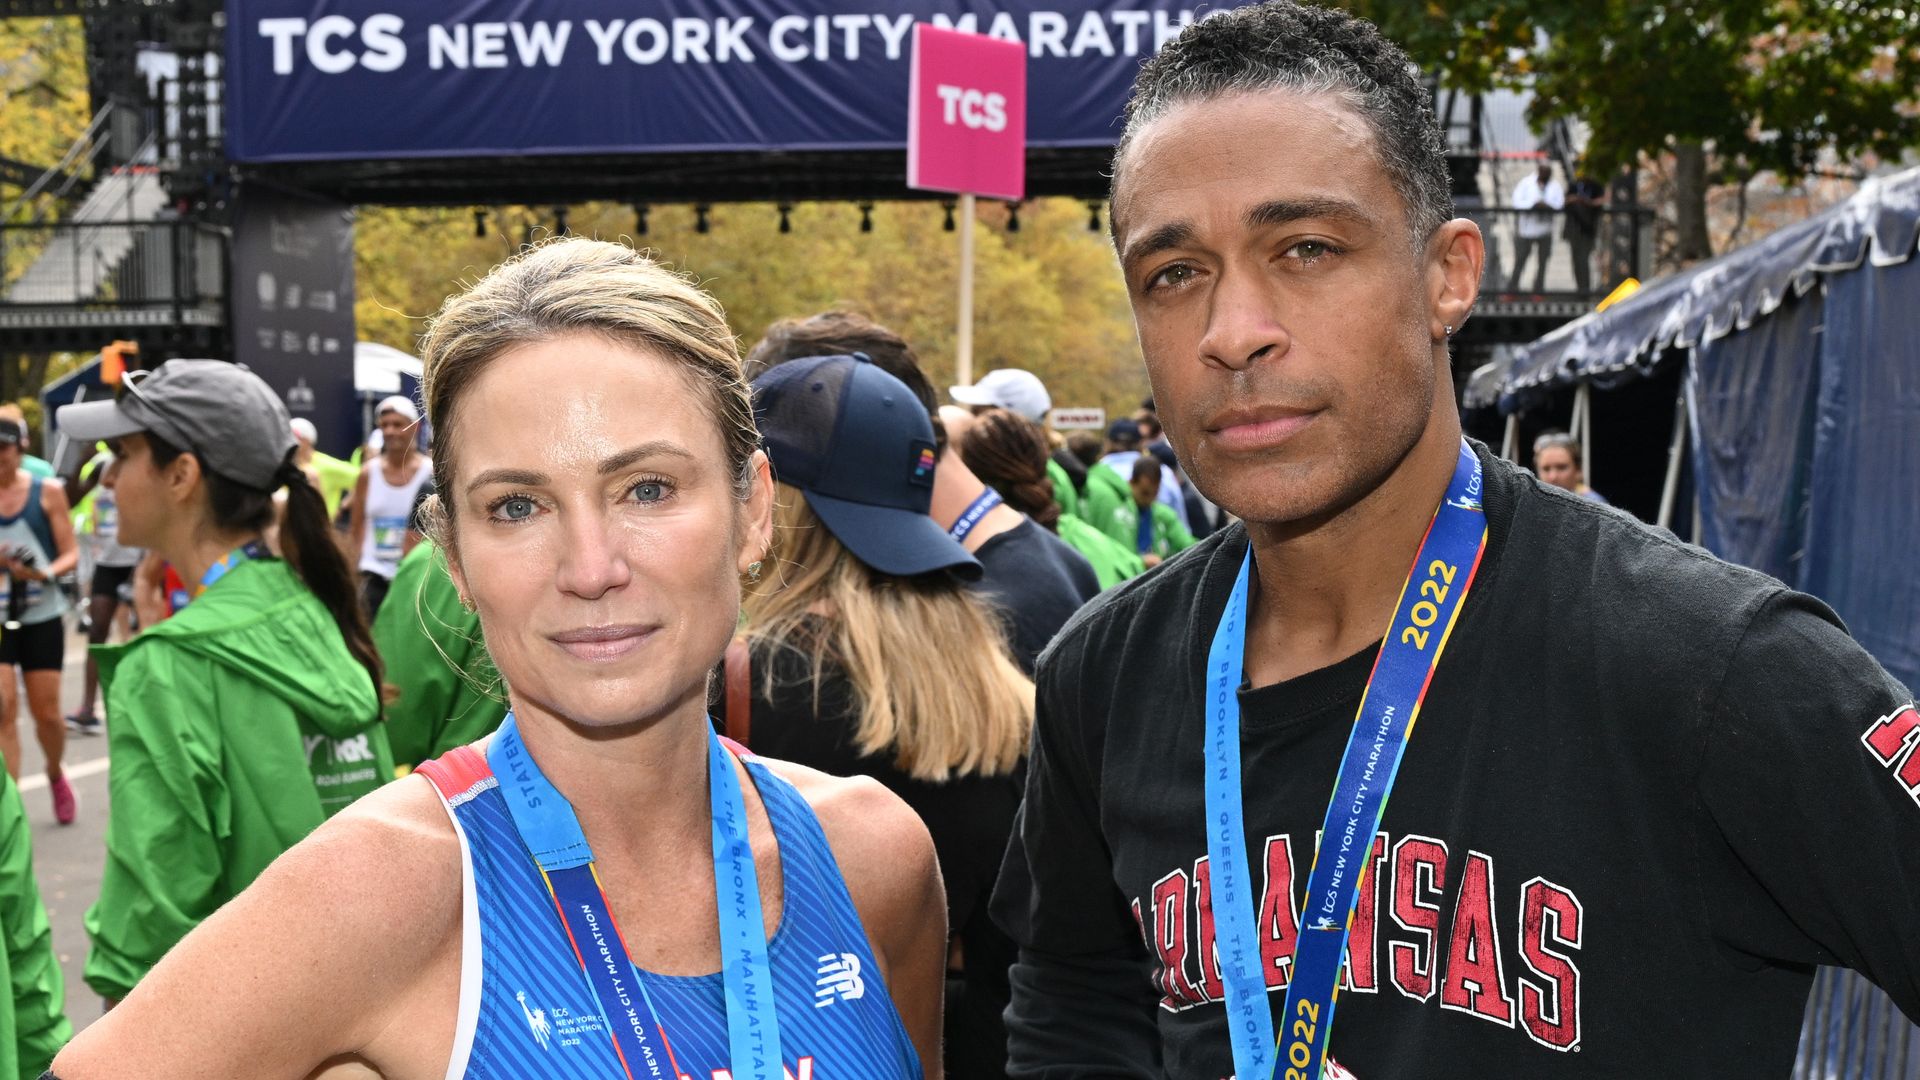 UPDATE: GMA3's Amy Robach, T.J. Holmes Officially Exit ABC News